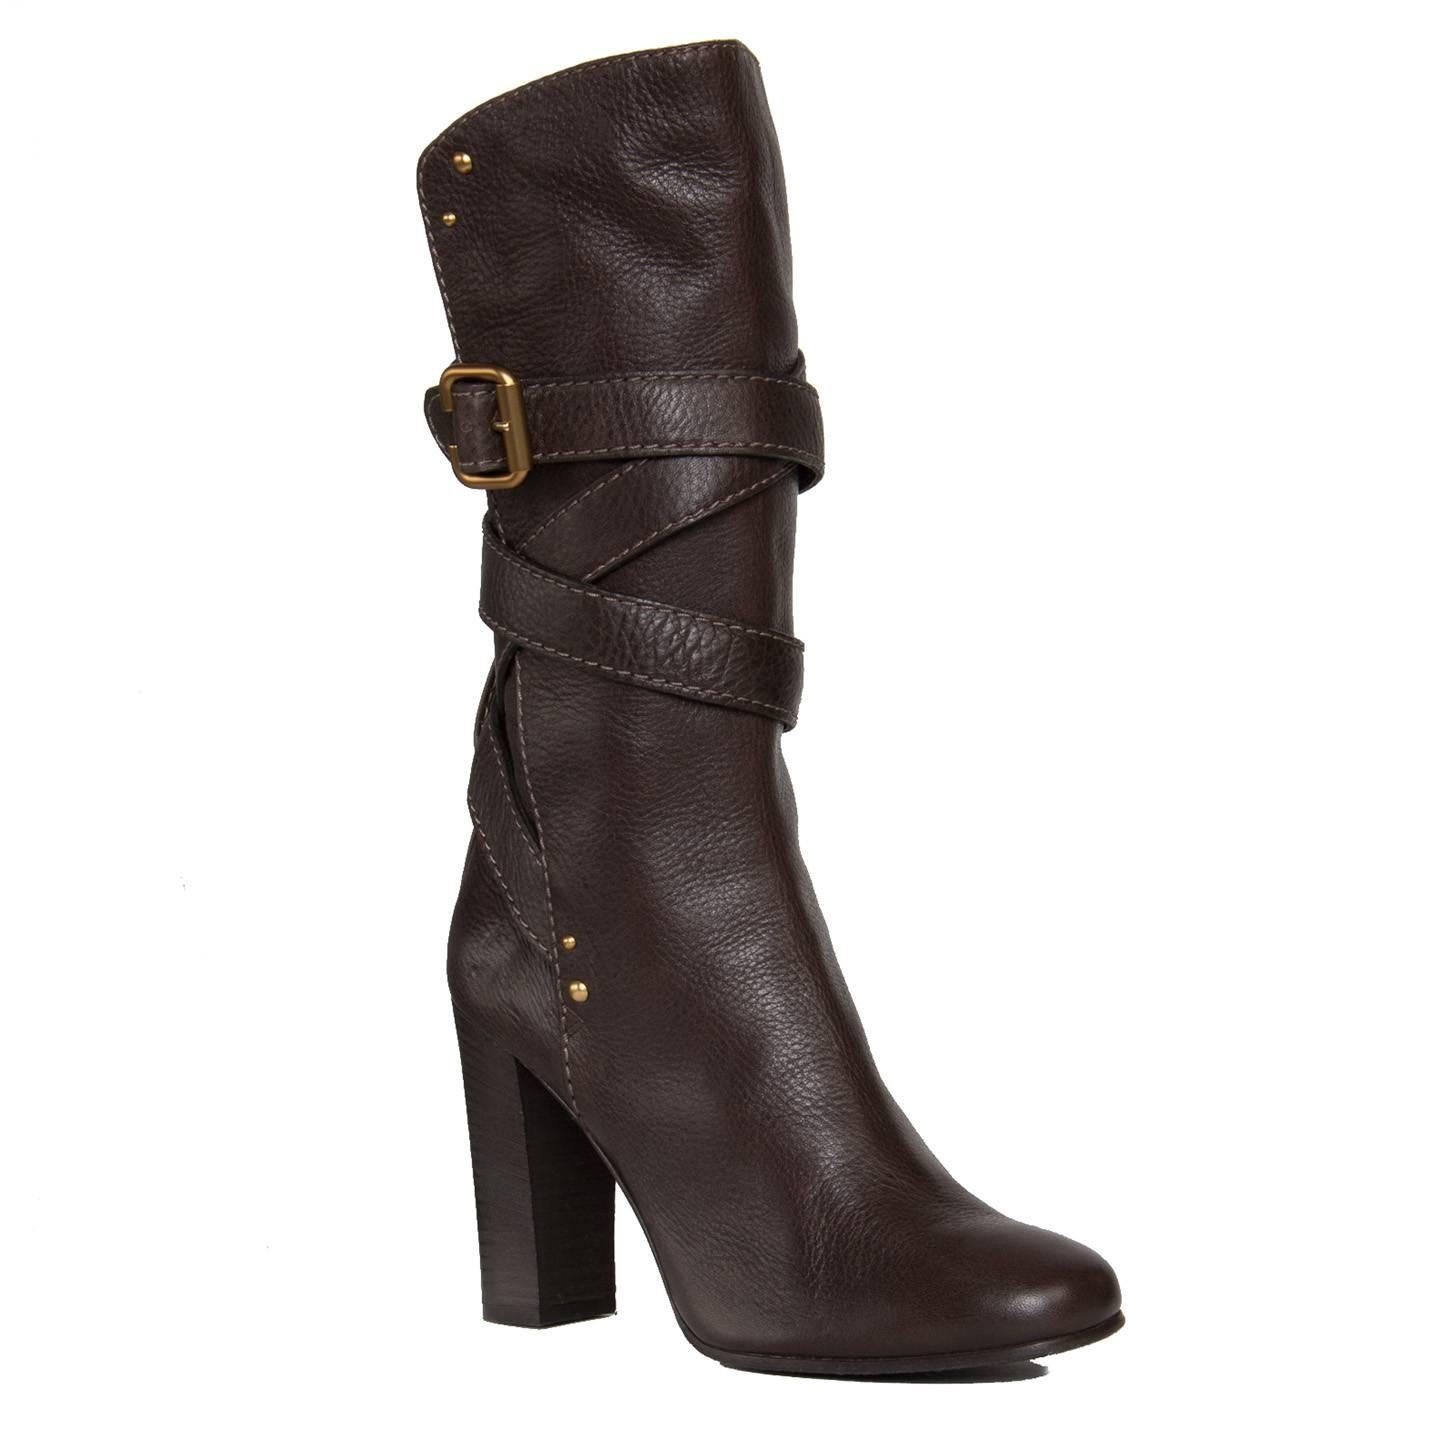 Chocolate brown calf high leather boots with round toe and wrap around straps that fastens on the side with a brushed gold color buckle. Round gold studs and thick tone-on-tone stitches decorate the boots further. Made in Italy. Heel 4